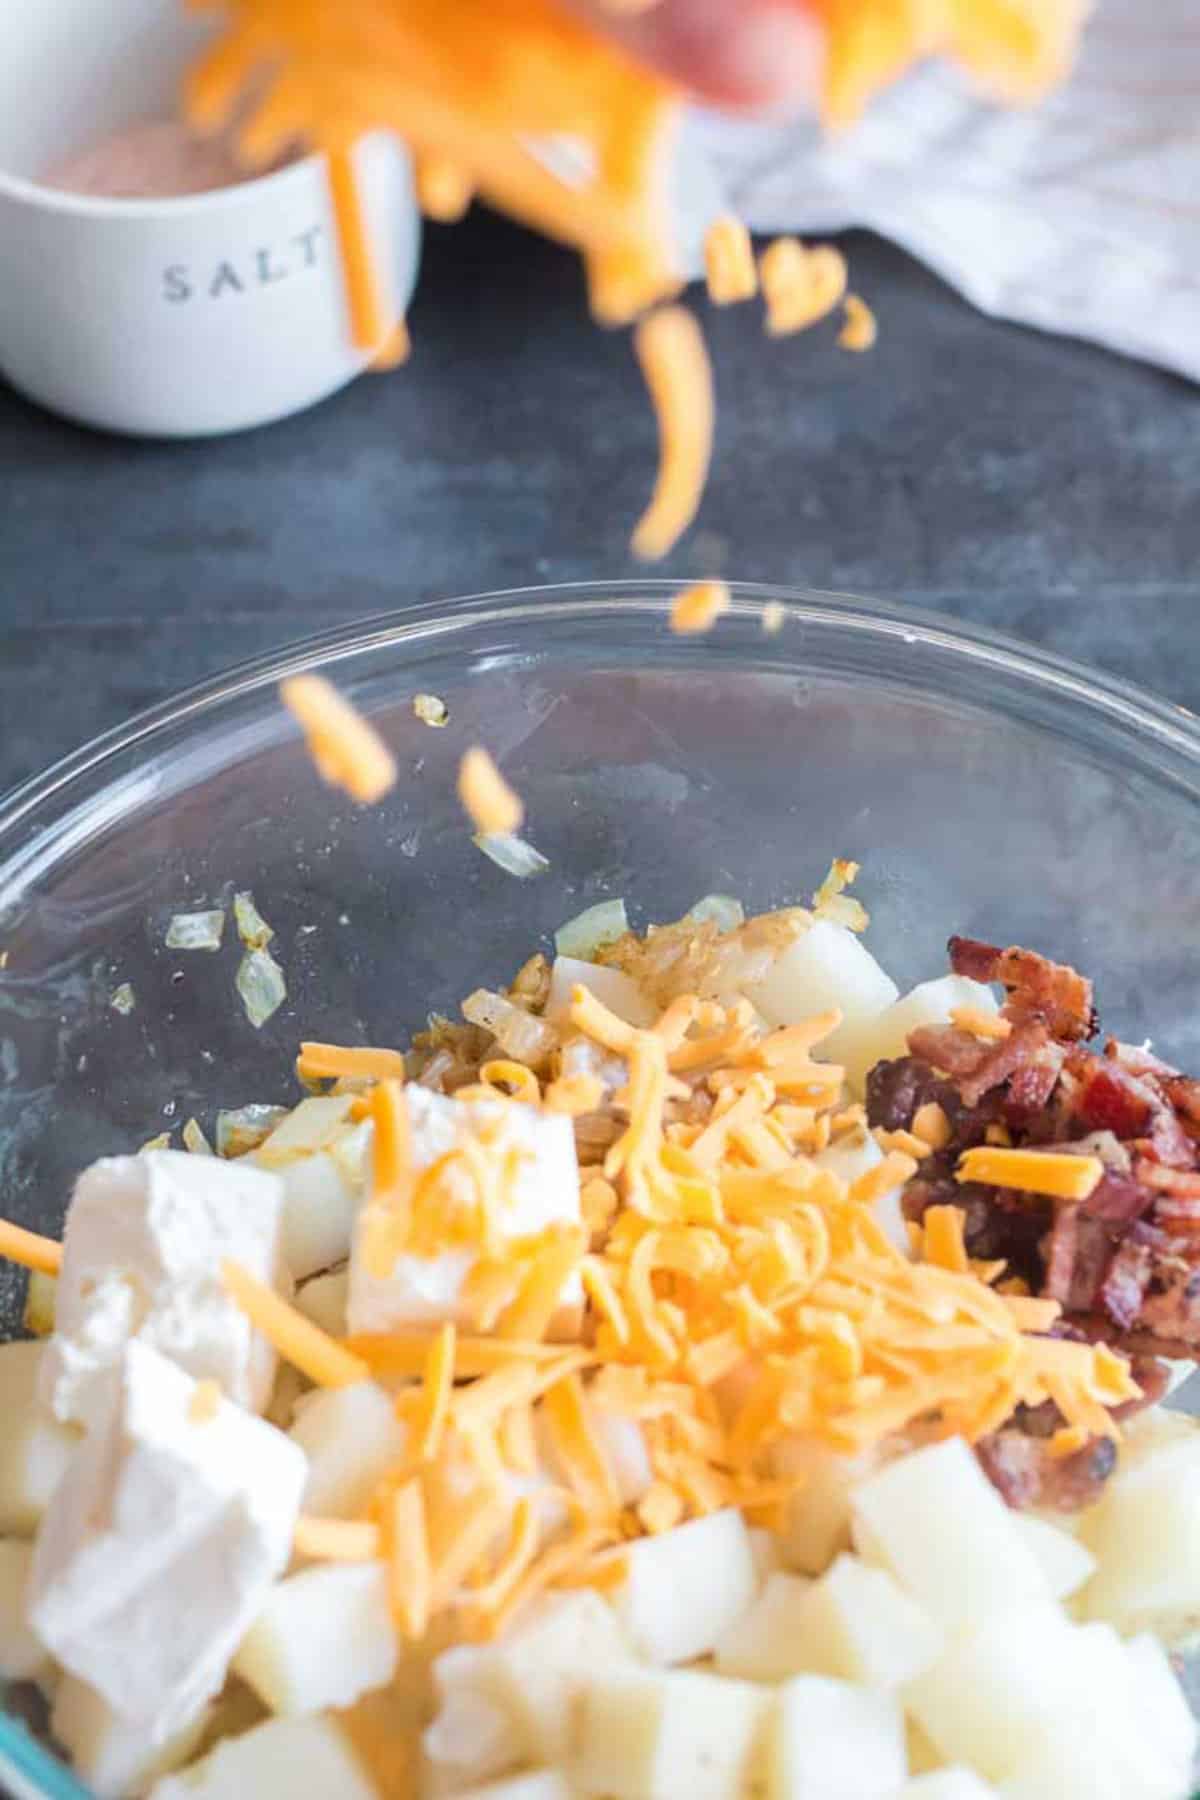 Adding shredded cheese to a mixing bowl with other ingredients.